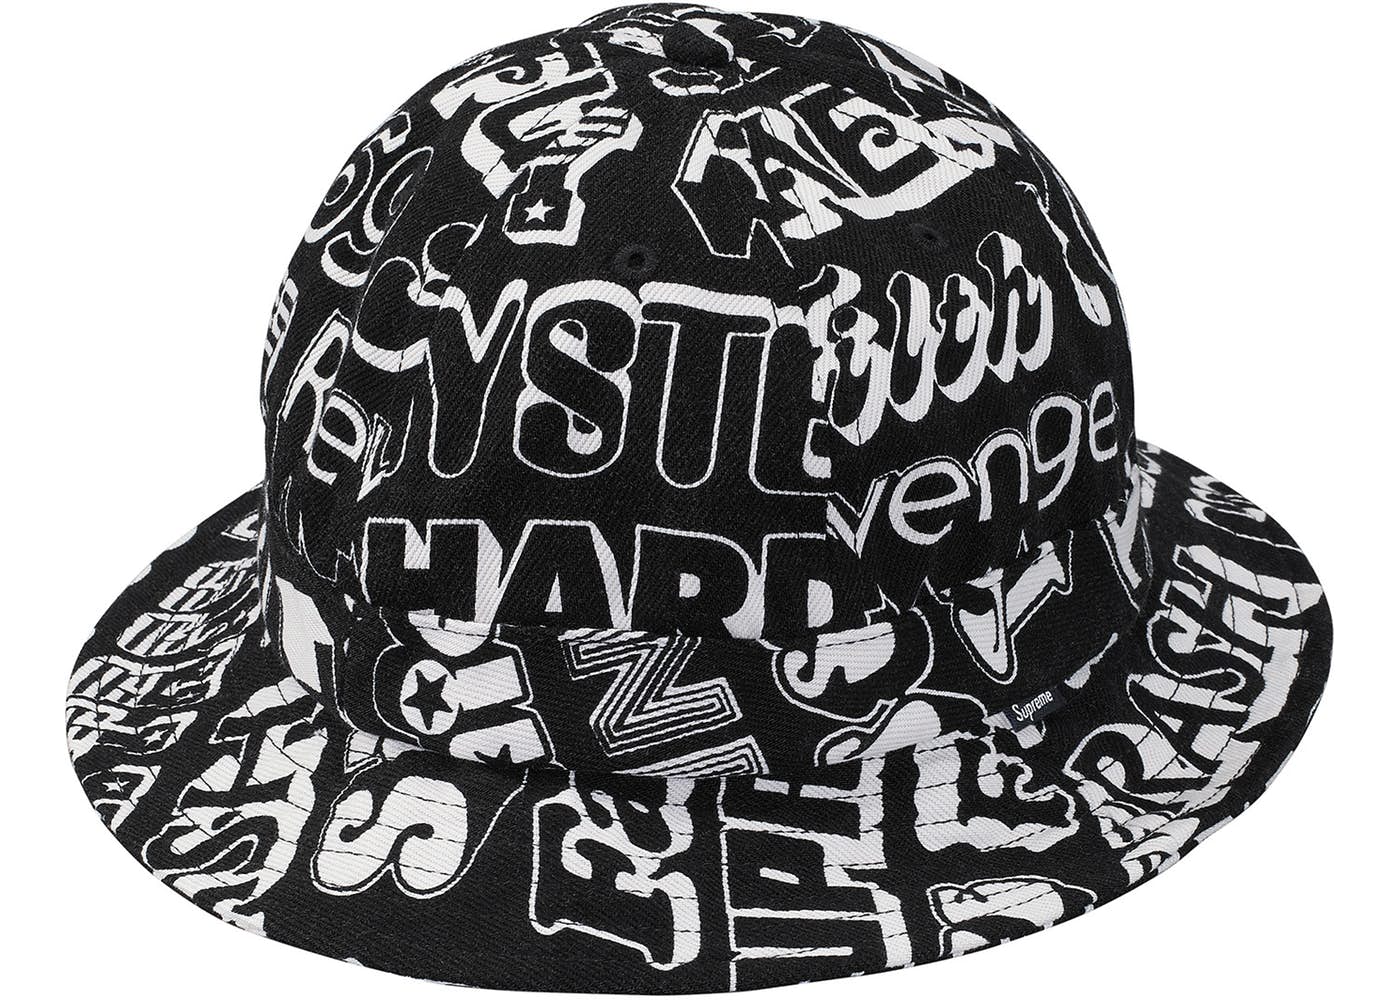 Supreme Hysteric Glamour Text Bell Hat Black Fall/Winter